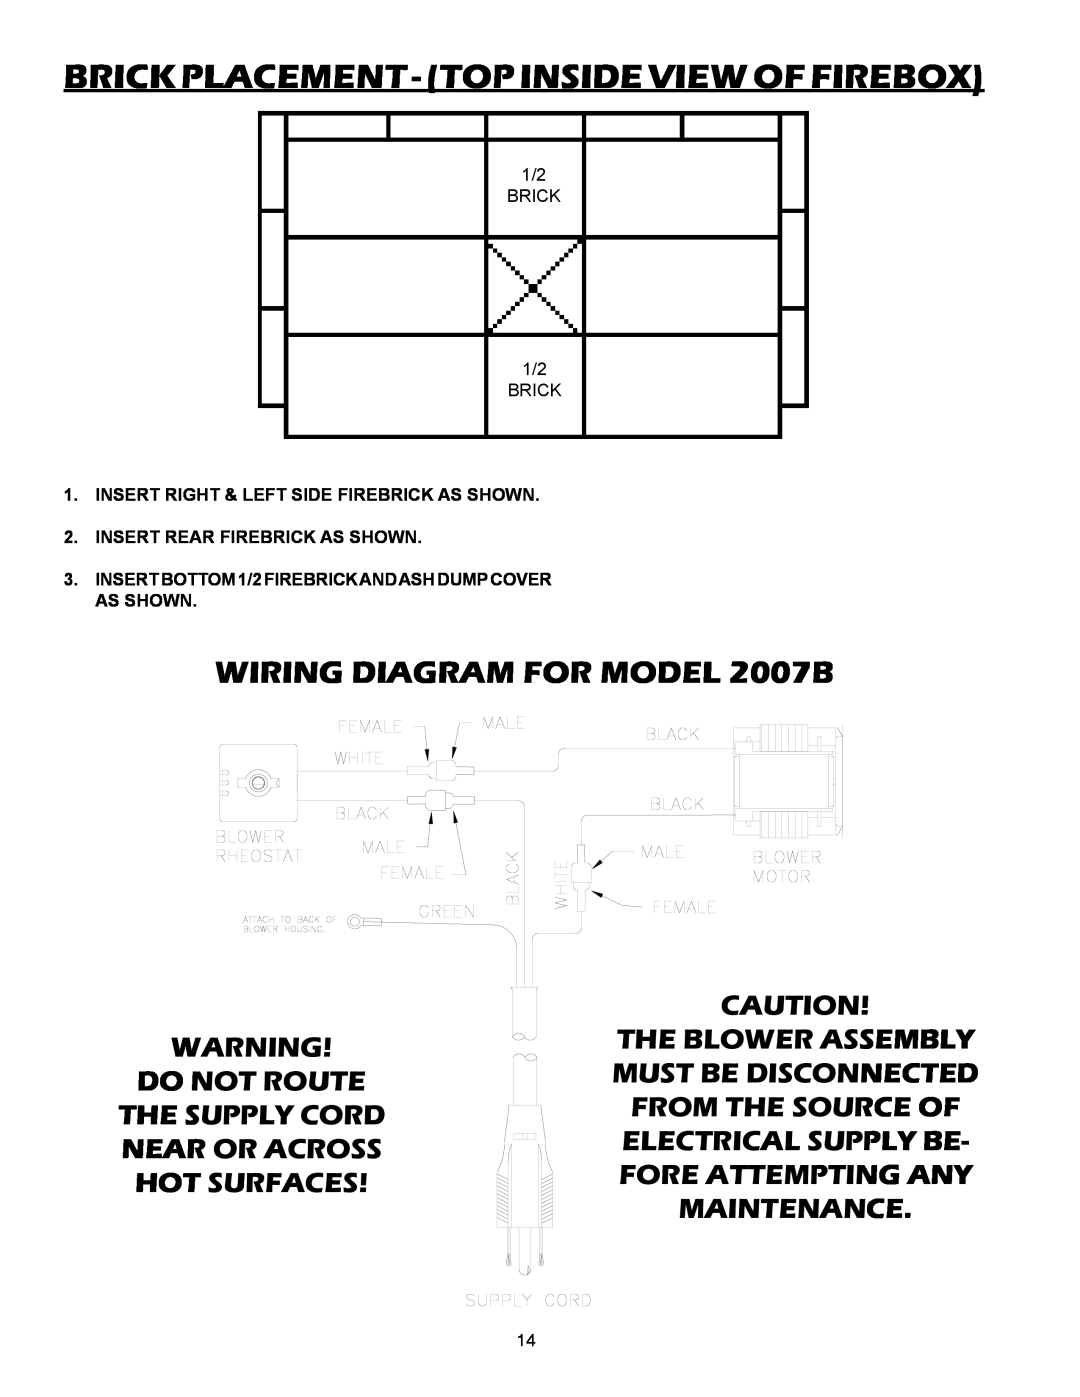 United States Stove WIRING DIAGRAM FOR model 2007B, Brick Placement - Top Inside View Of Firebox, Do Not Route 